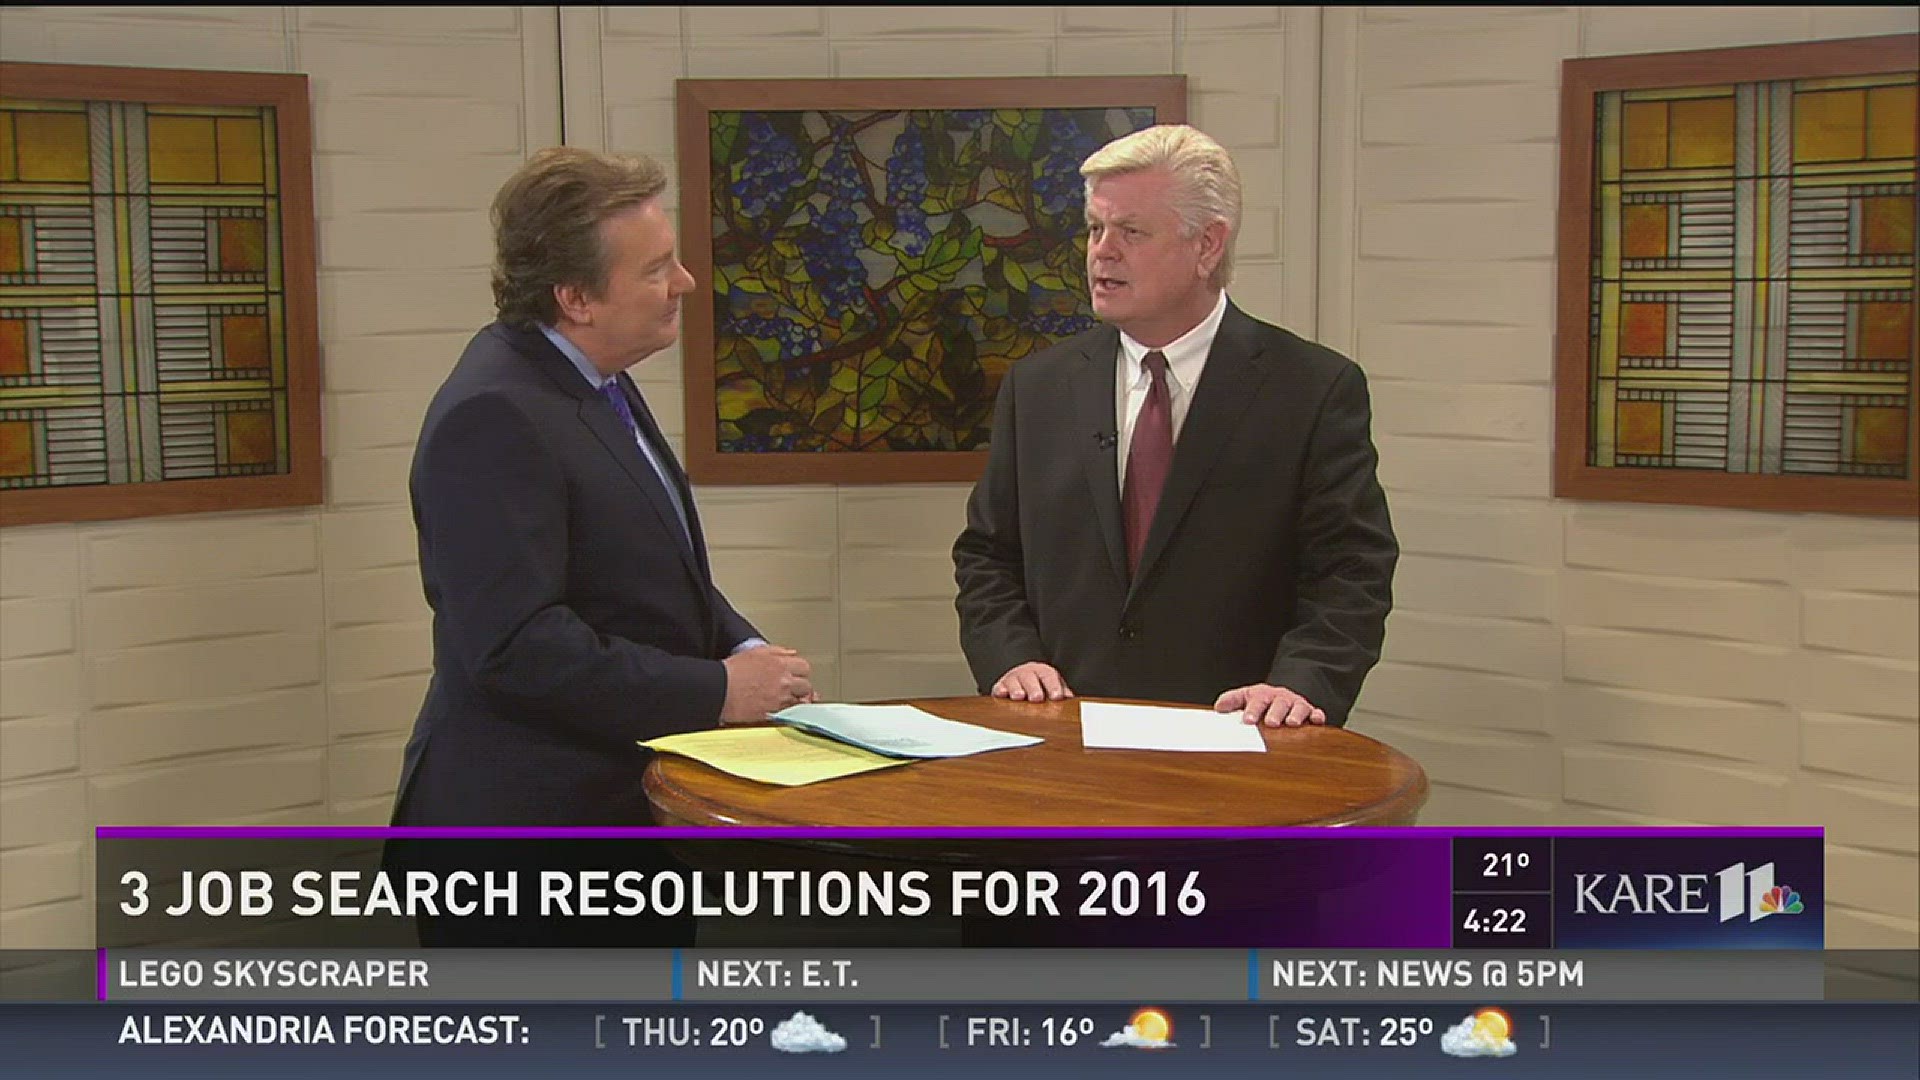 Three job search resolutions for 2016